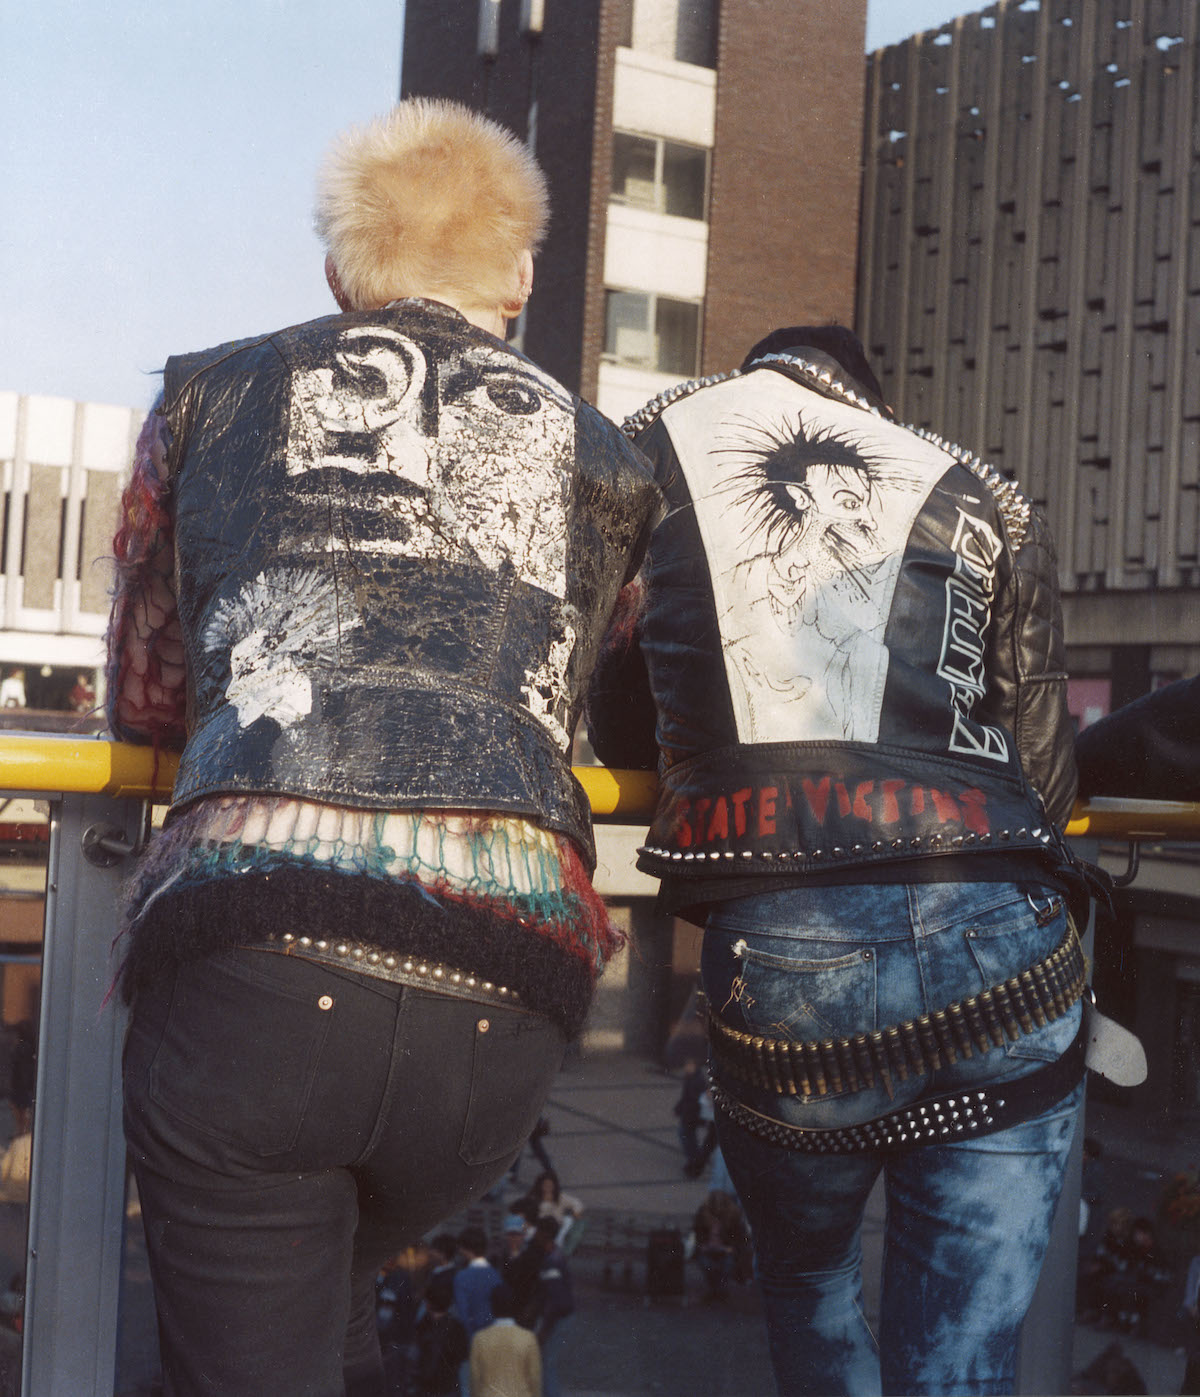 Two punks in Stockport